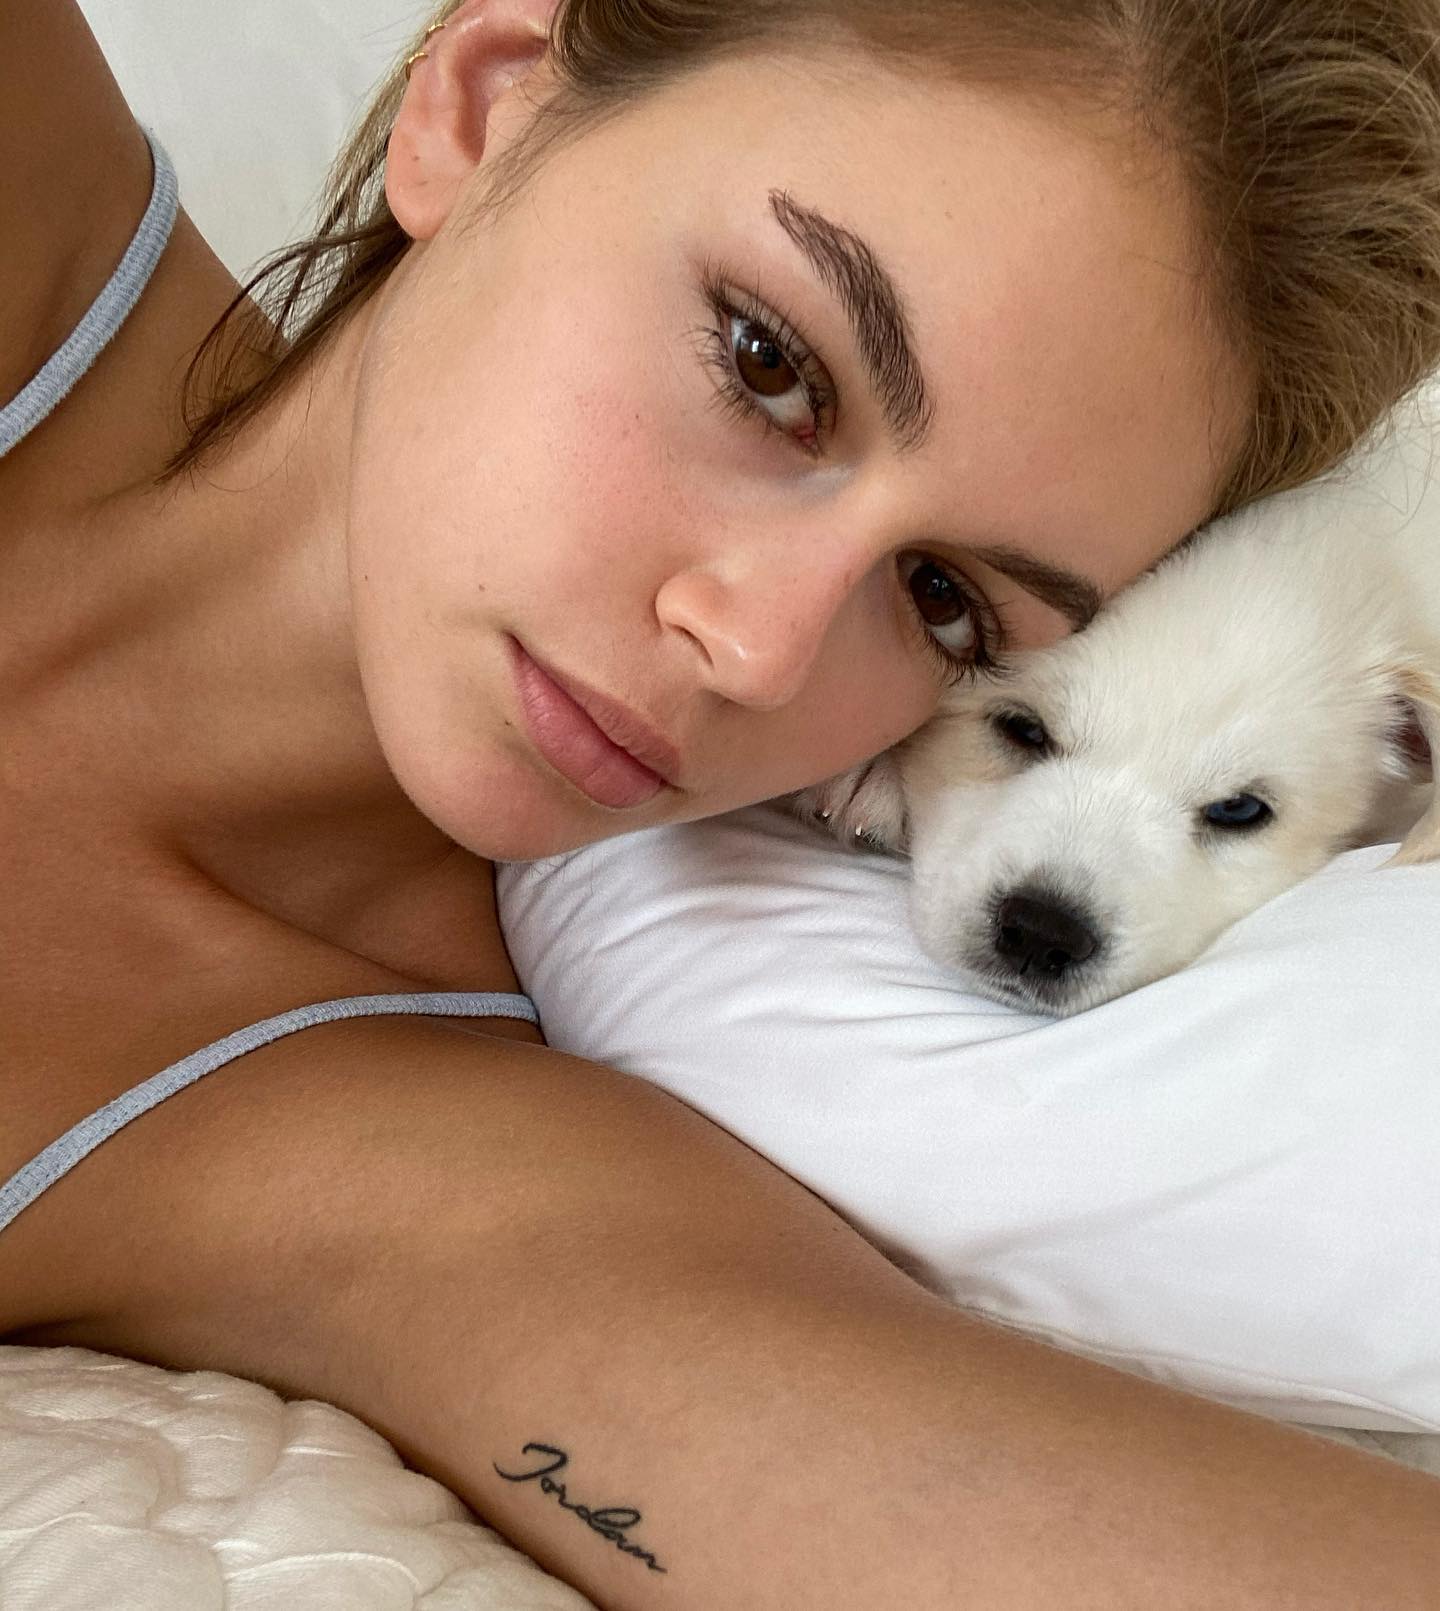 Kaia Gerber is removing shoulder tattoo